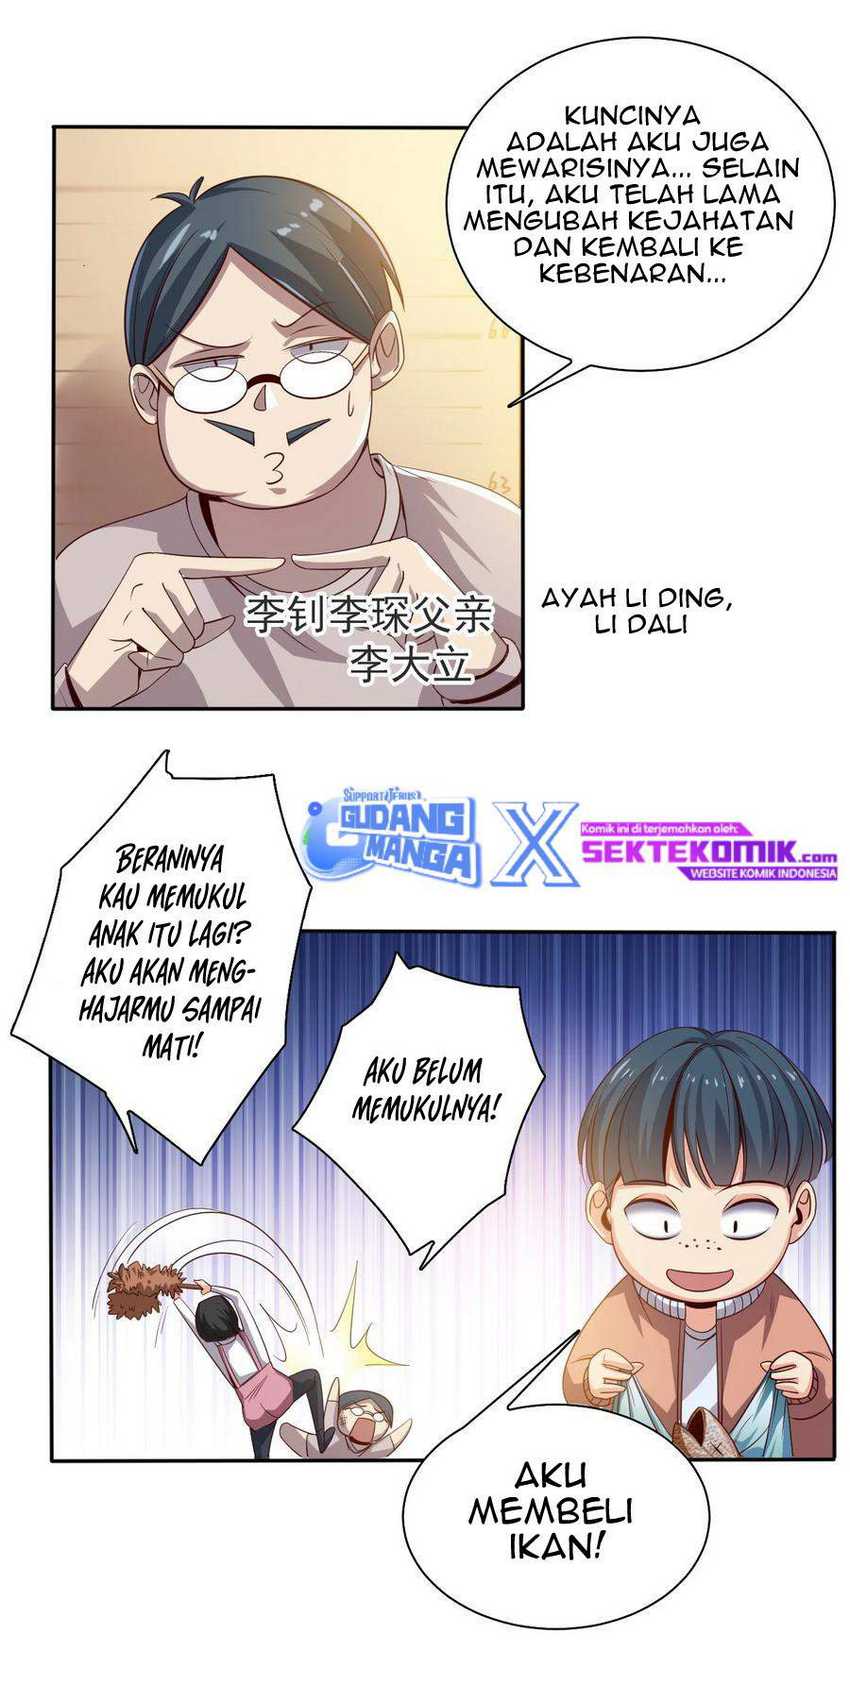 The Strongest Son in Law in History Chapter 05